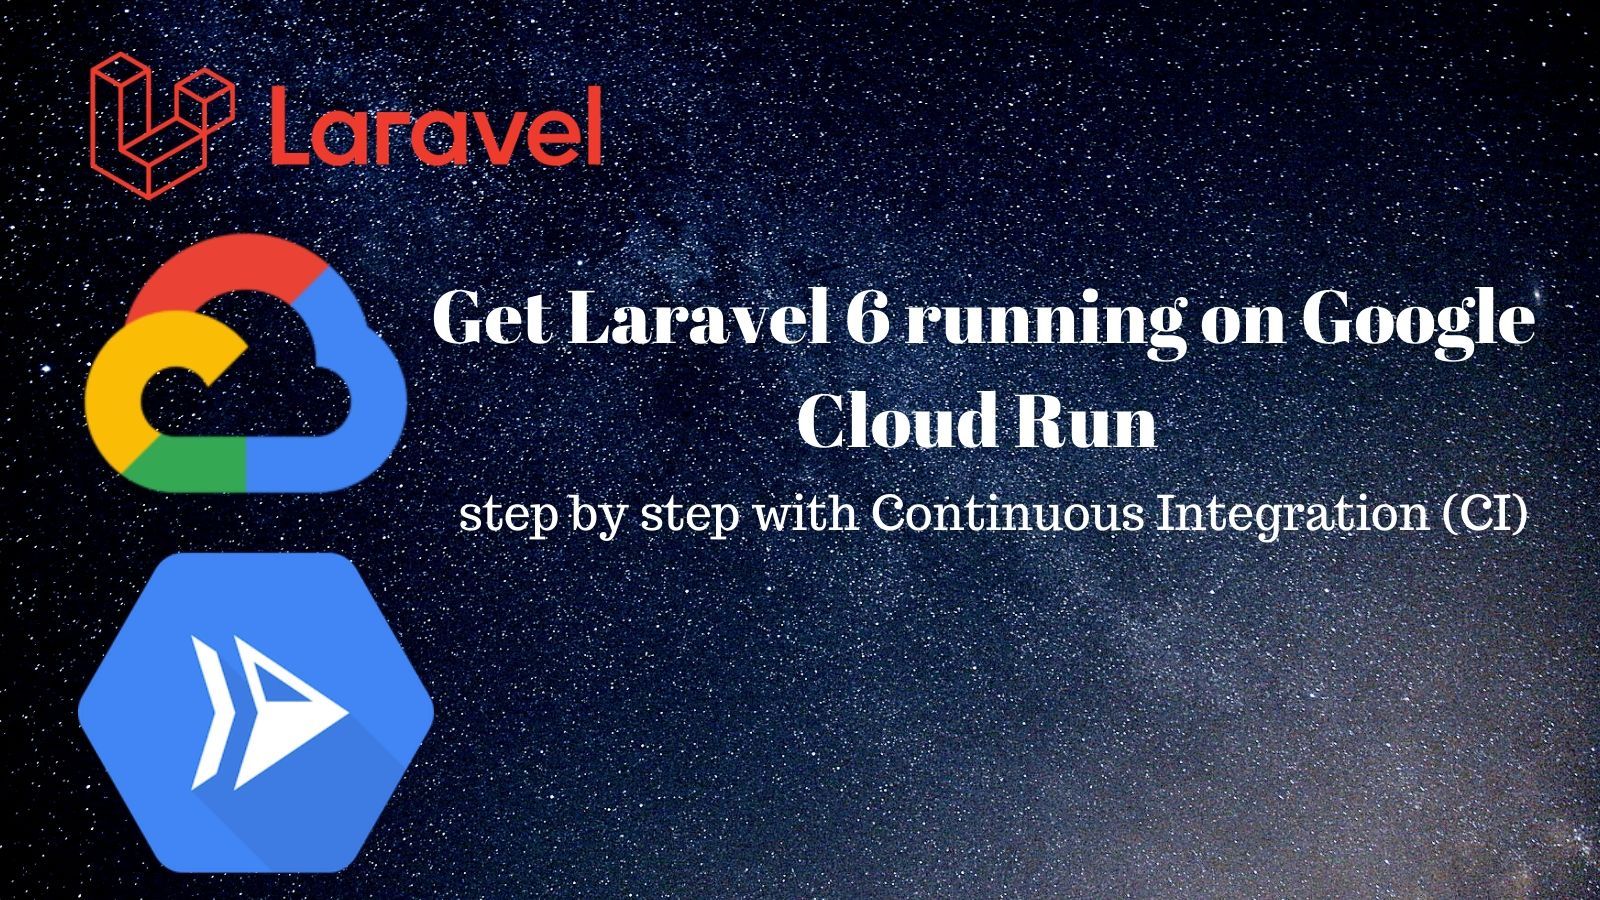 How to run Laravel on Google Cloud Run with Continuous Integration - a step by step guide